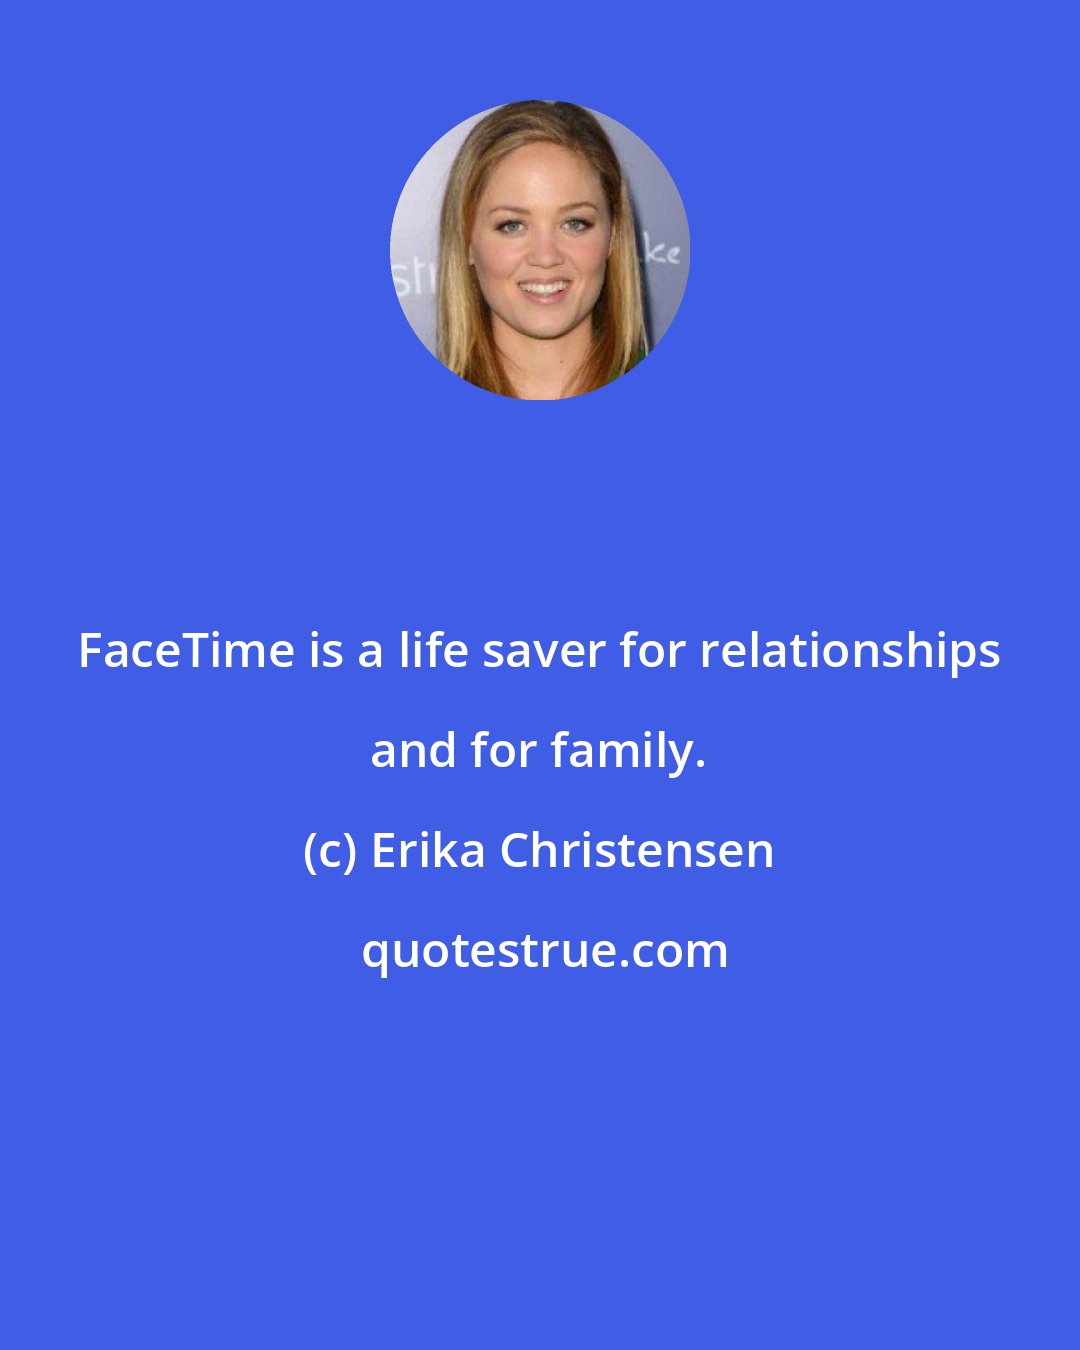 Erika Christensen: FaceTime is a life saver for relationships and for family.